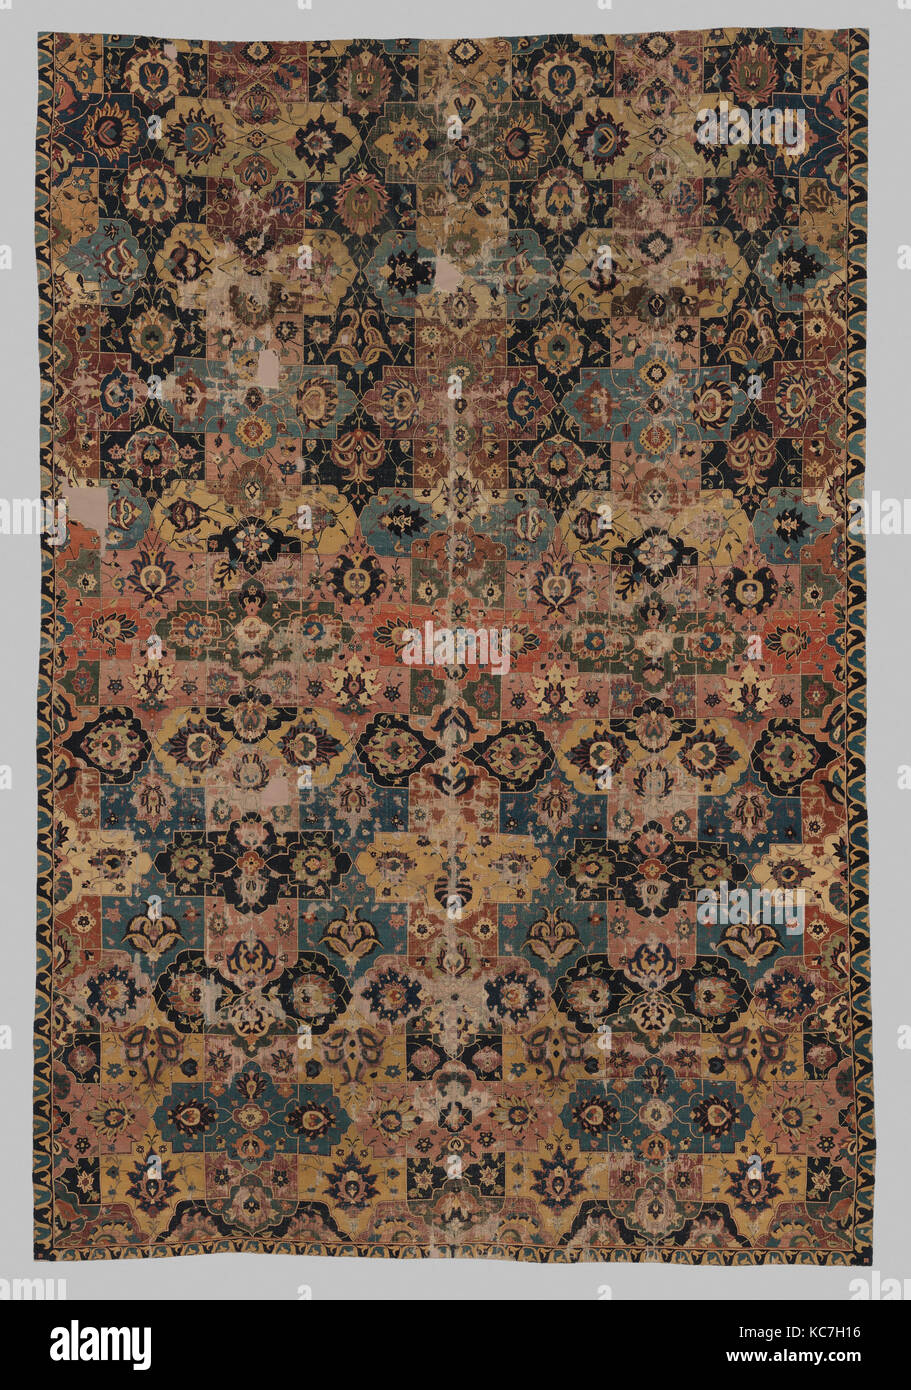 Vase-technique Carpet with Overlapping Cartouches, 17th century Stock Photo